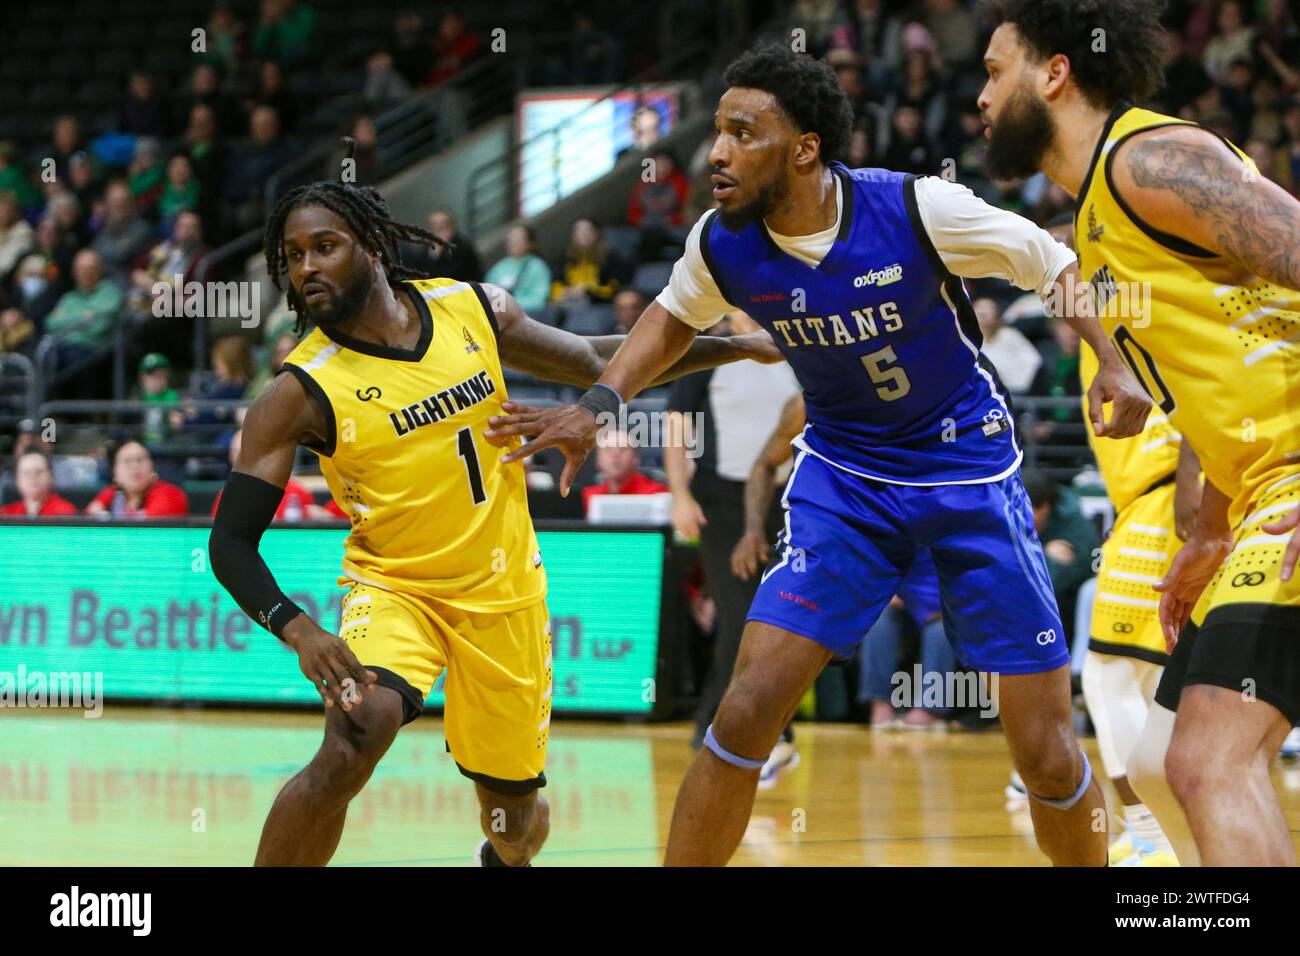 London, Canada. 17th Mar, 2024. London Ontario Canada. March 17 2024, The London Lightning defeat the Kitchener Titans 118-114 in regulation on St. Patrick's Day. Marcus Ottey (1) and Jermaine Haley Jr (10) of London Lightning double team Jaquan Lightfoot (5) of Kitchener Titans. Credit: Luke Durda/Alamy Live News Stock Photo